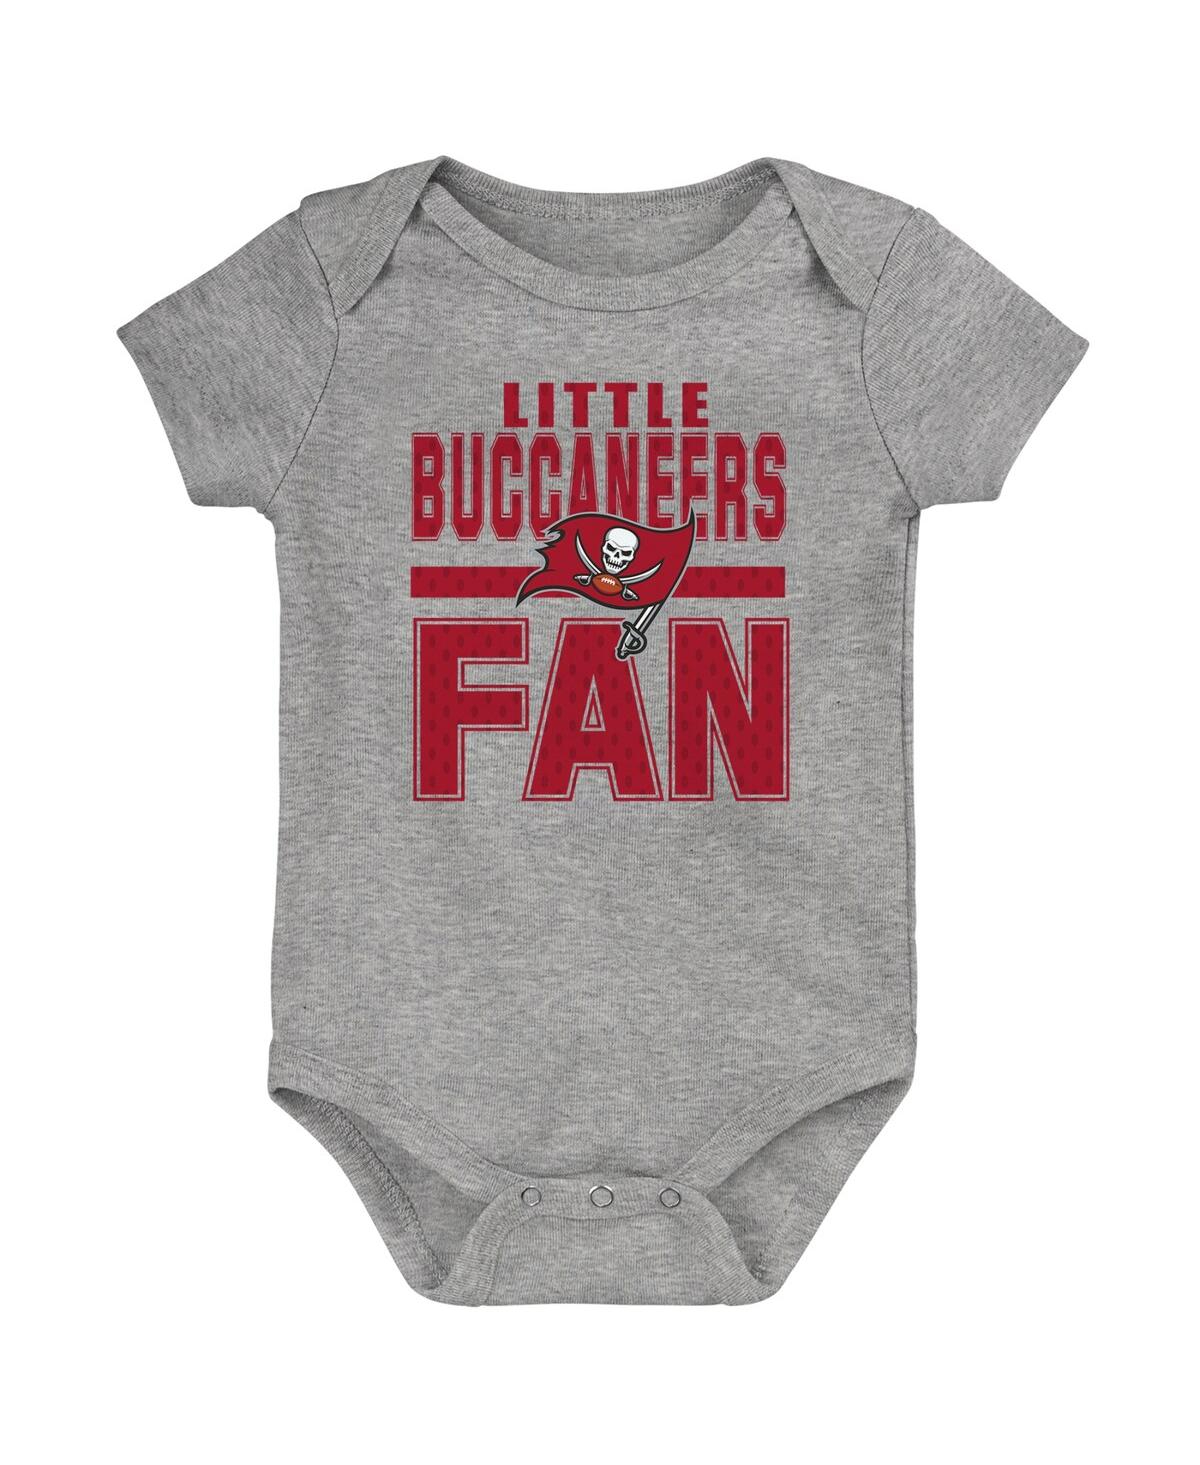 Outerstuff Babies' Newborn And Infant Boys And Girls Heathered Gray Tampa Bay Buccaneers Little Fan Bodysuit